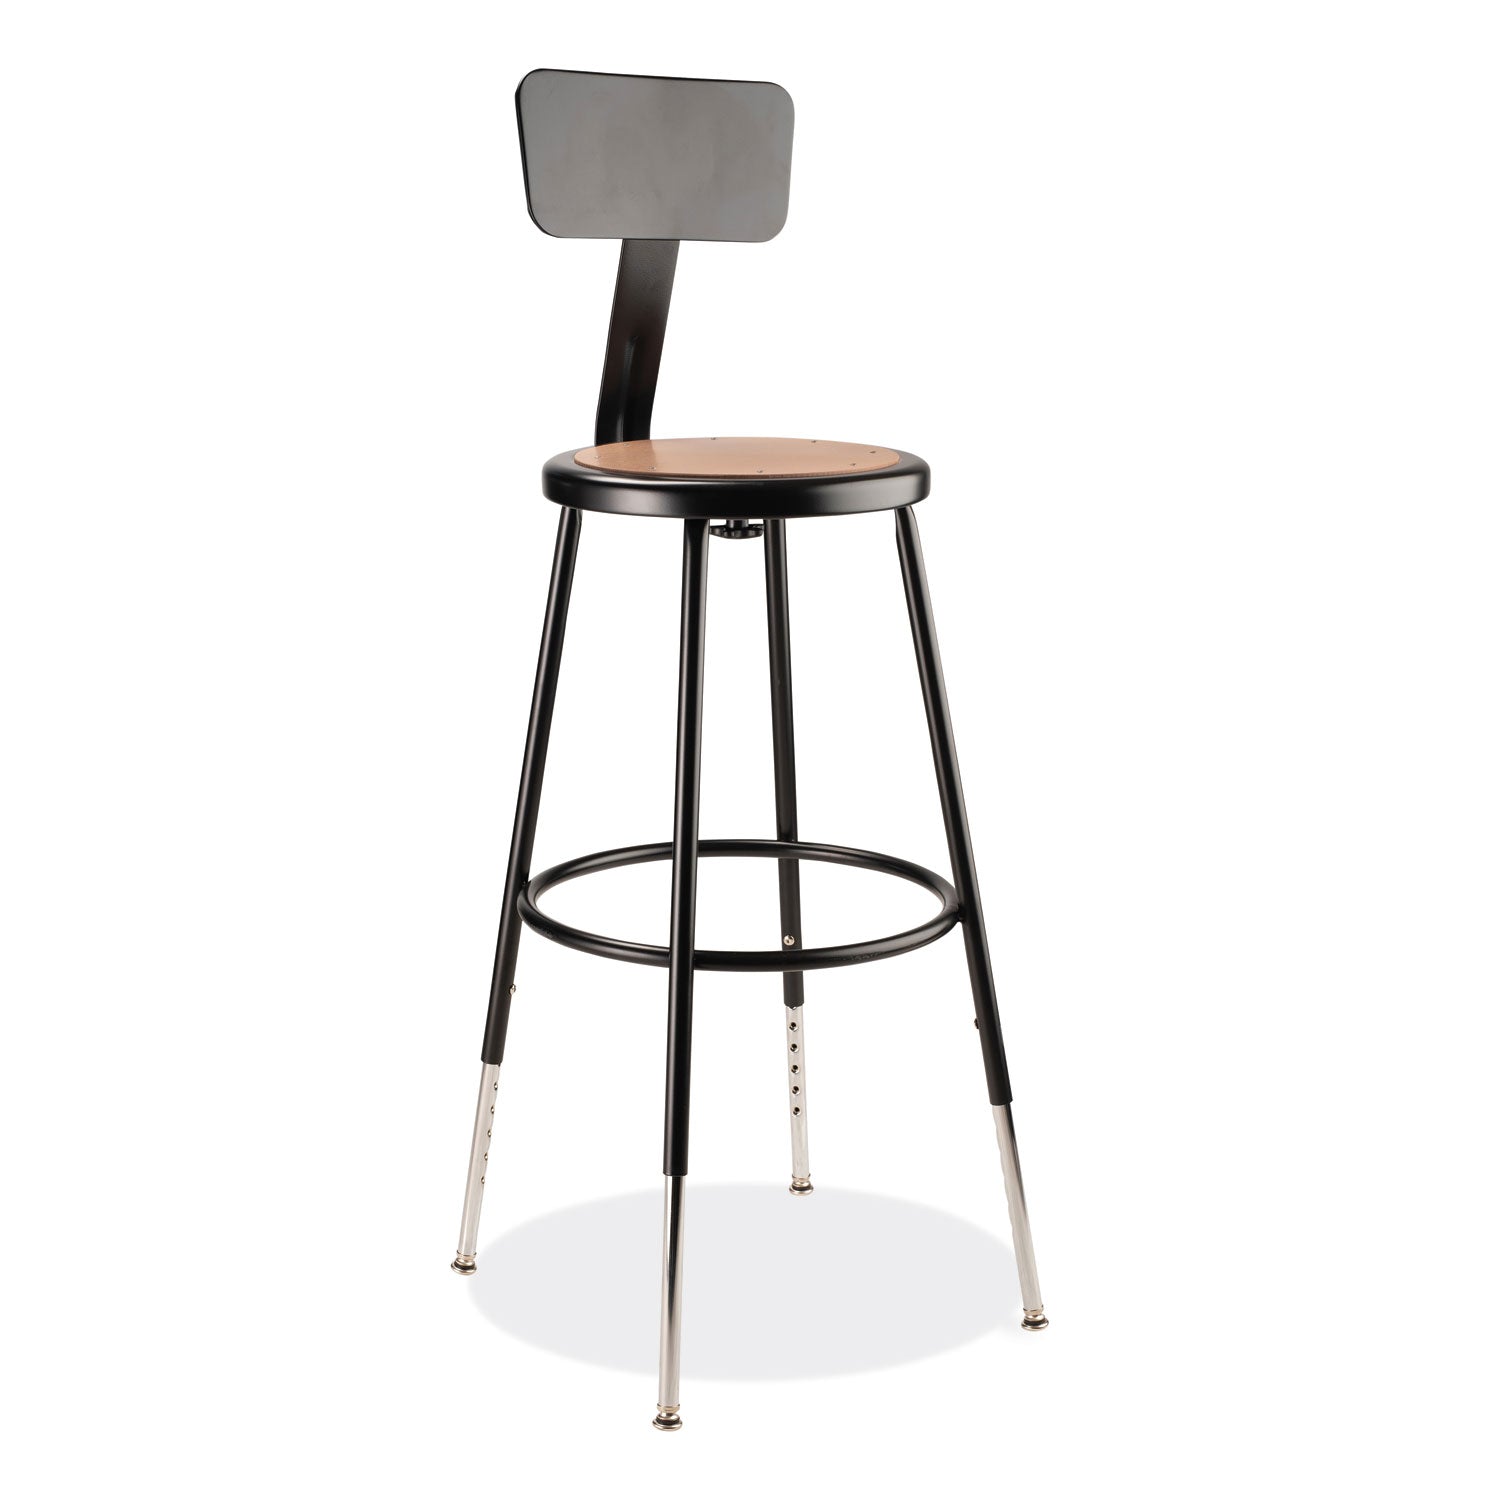 6200-series-25-33-height-adj-heavy-duty-stool-with-backrest-supports-500-lb-brown-seat-black-base-ships-in-1-3-bus-days_nps6224hb10 - 1